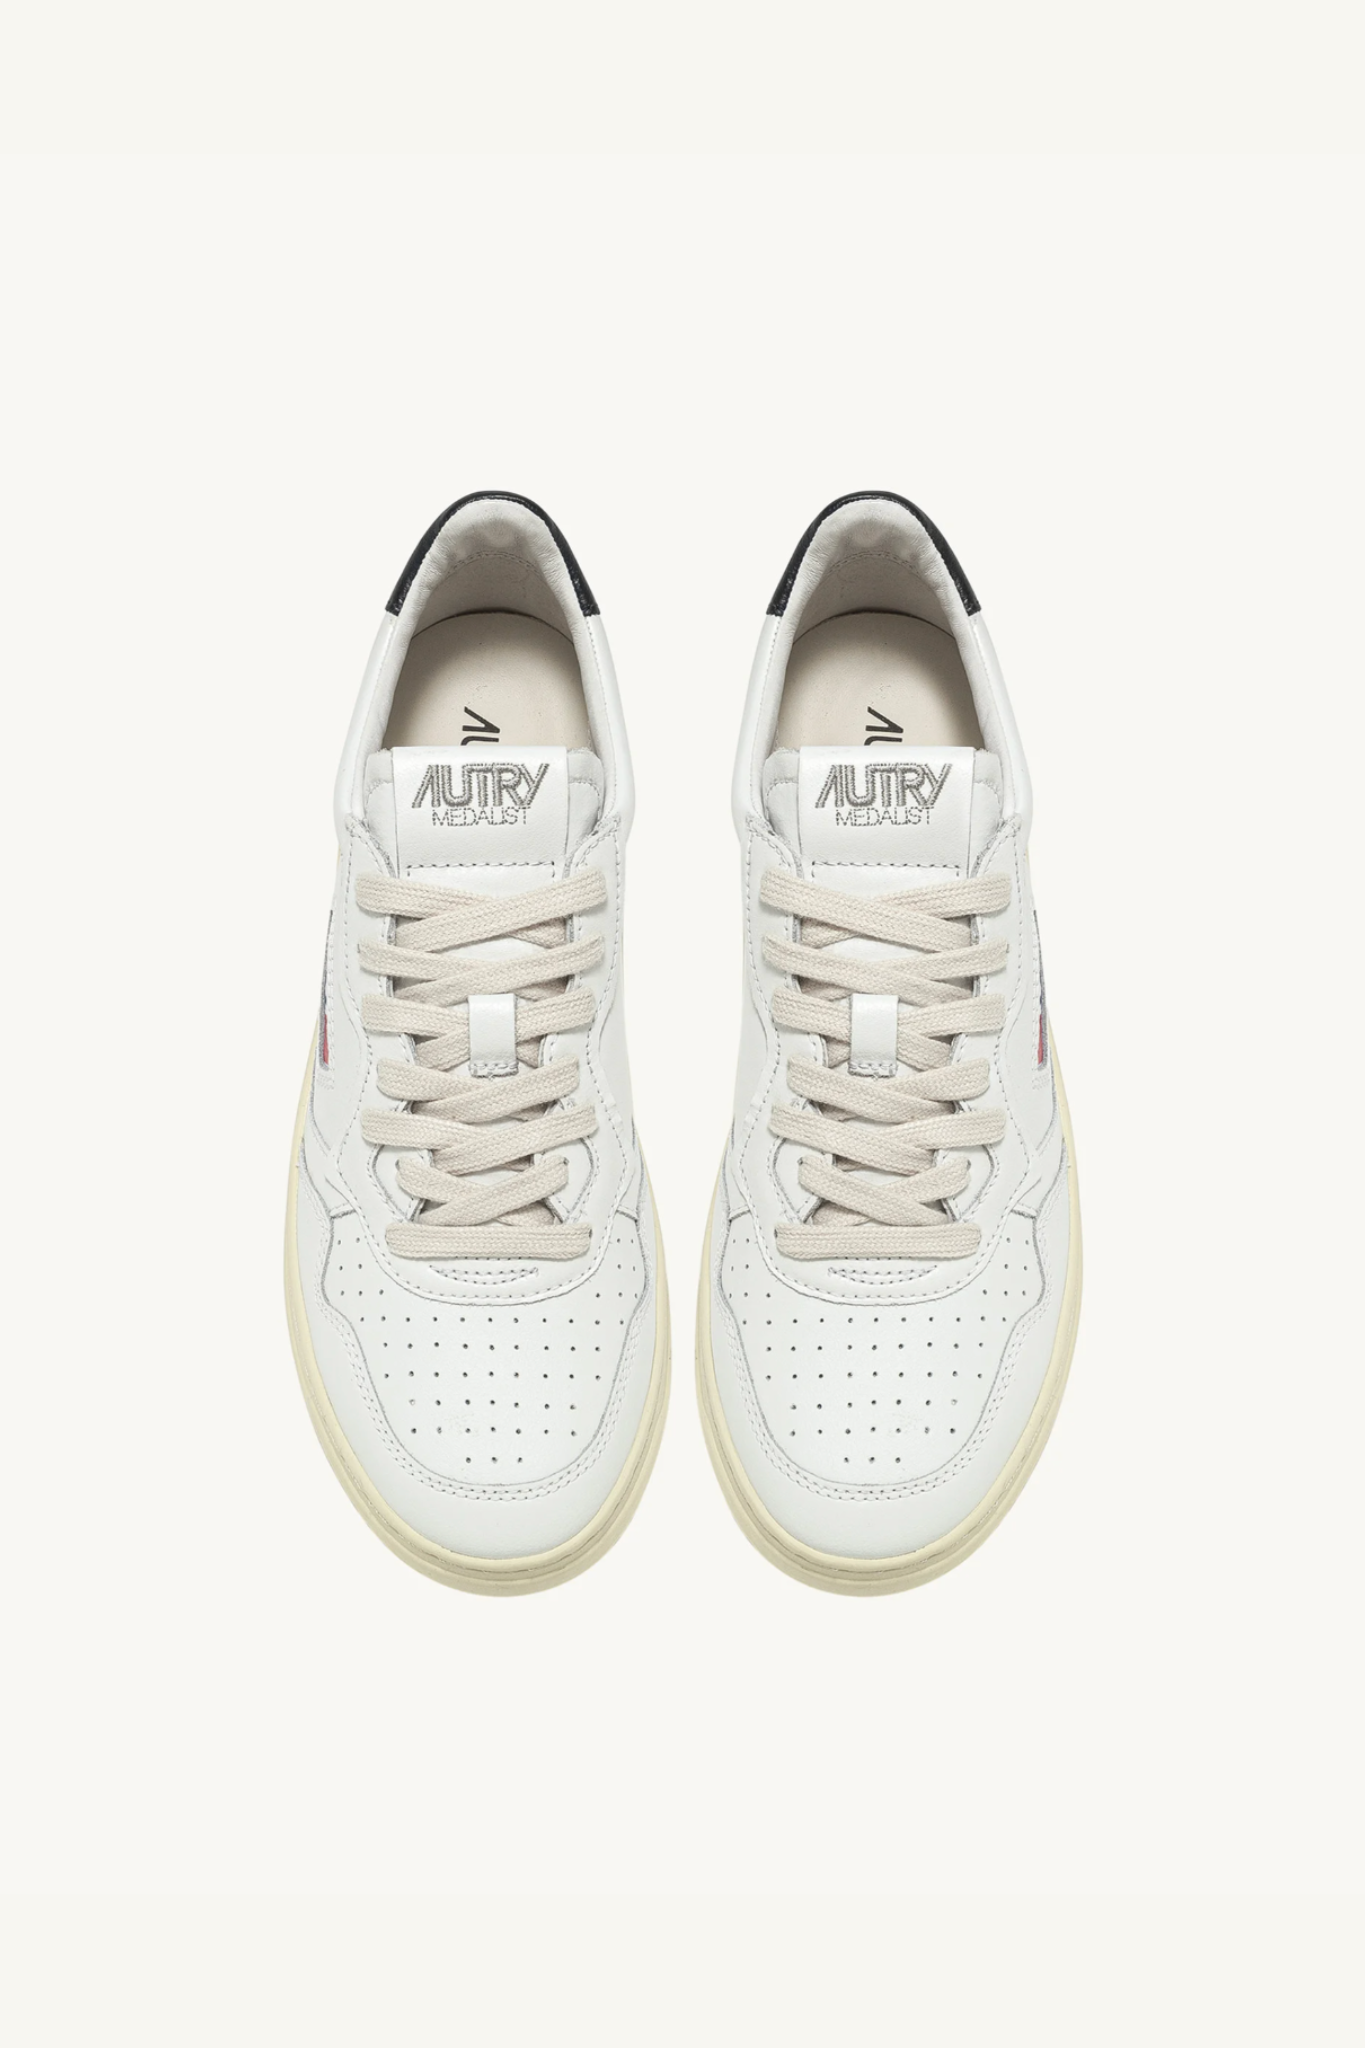 AULM-LL22 - MEDALIST LOW SNEAKERS IN LEATHER WHITE AND BLACK